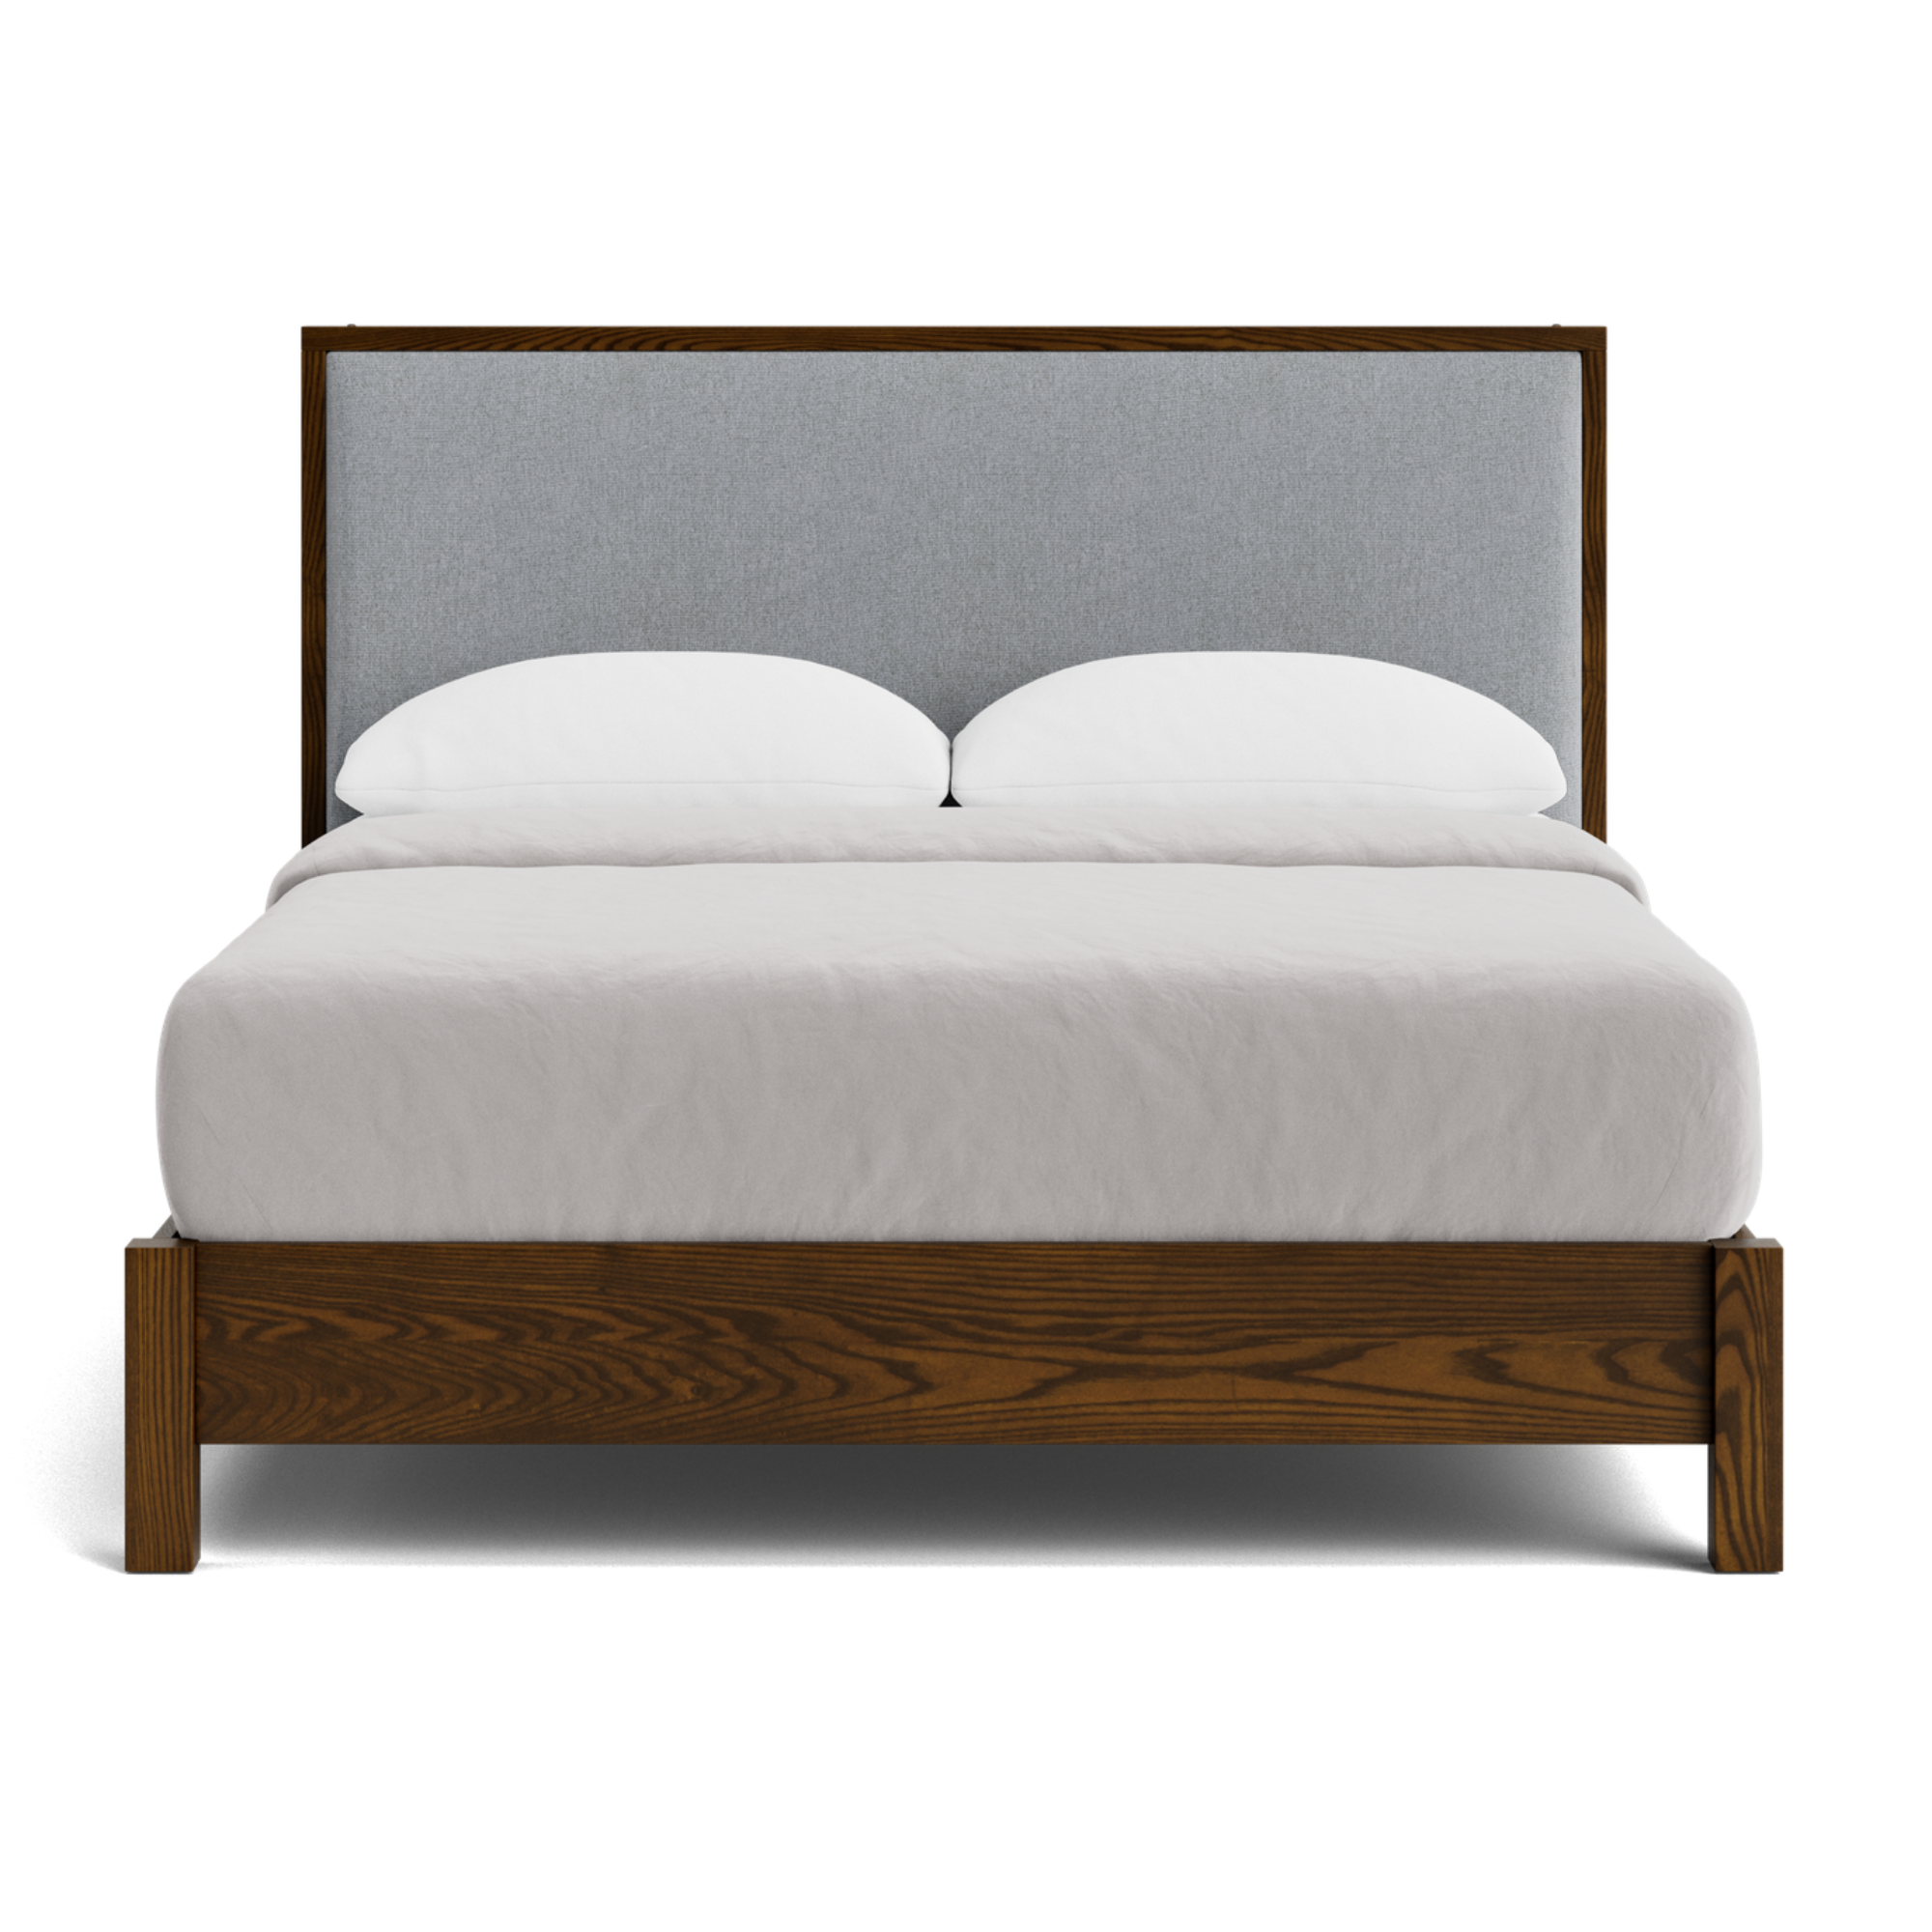 ANDES LOW-FOOT SLAT BED WITH UPHOLSTERED HEADBOARD | NZ MADE